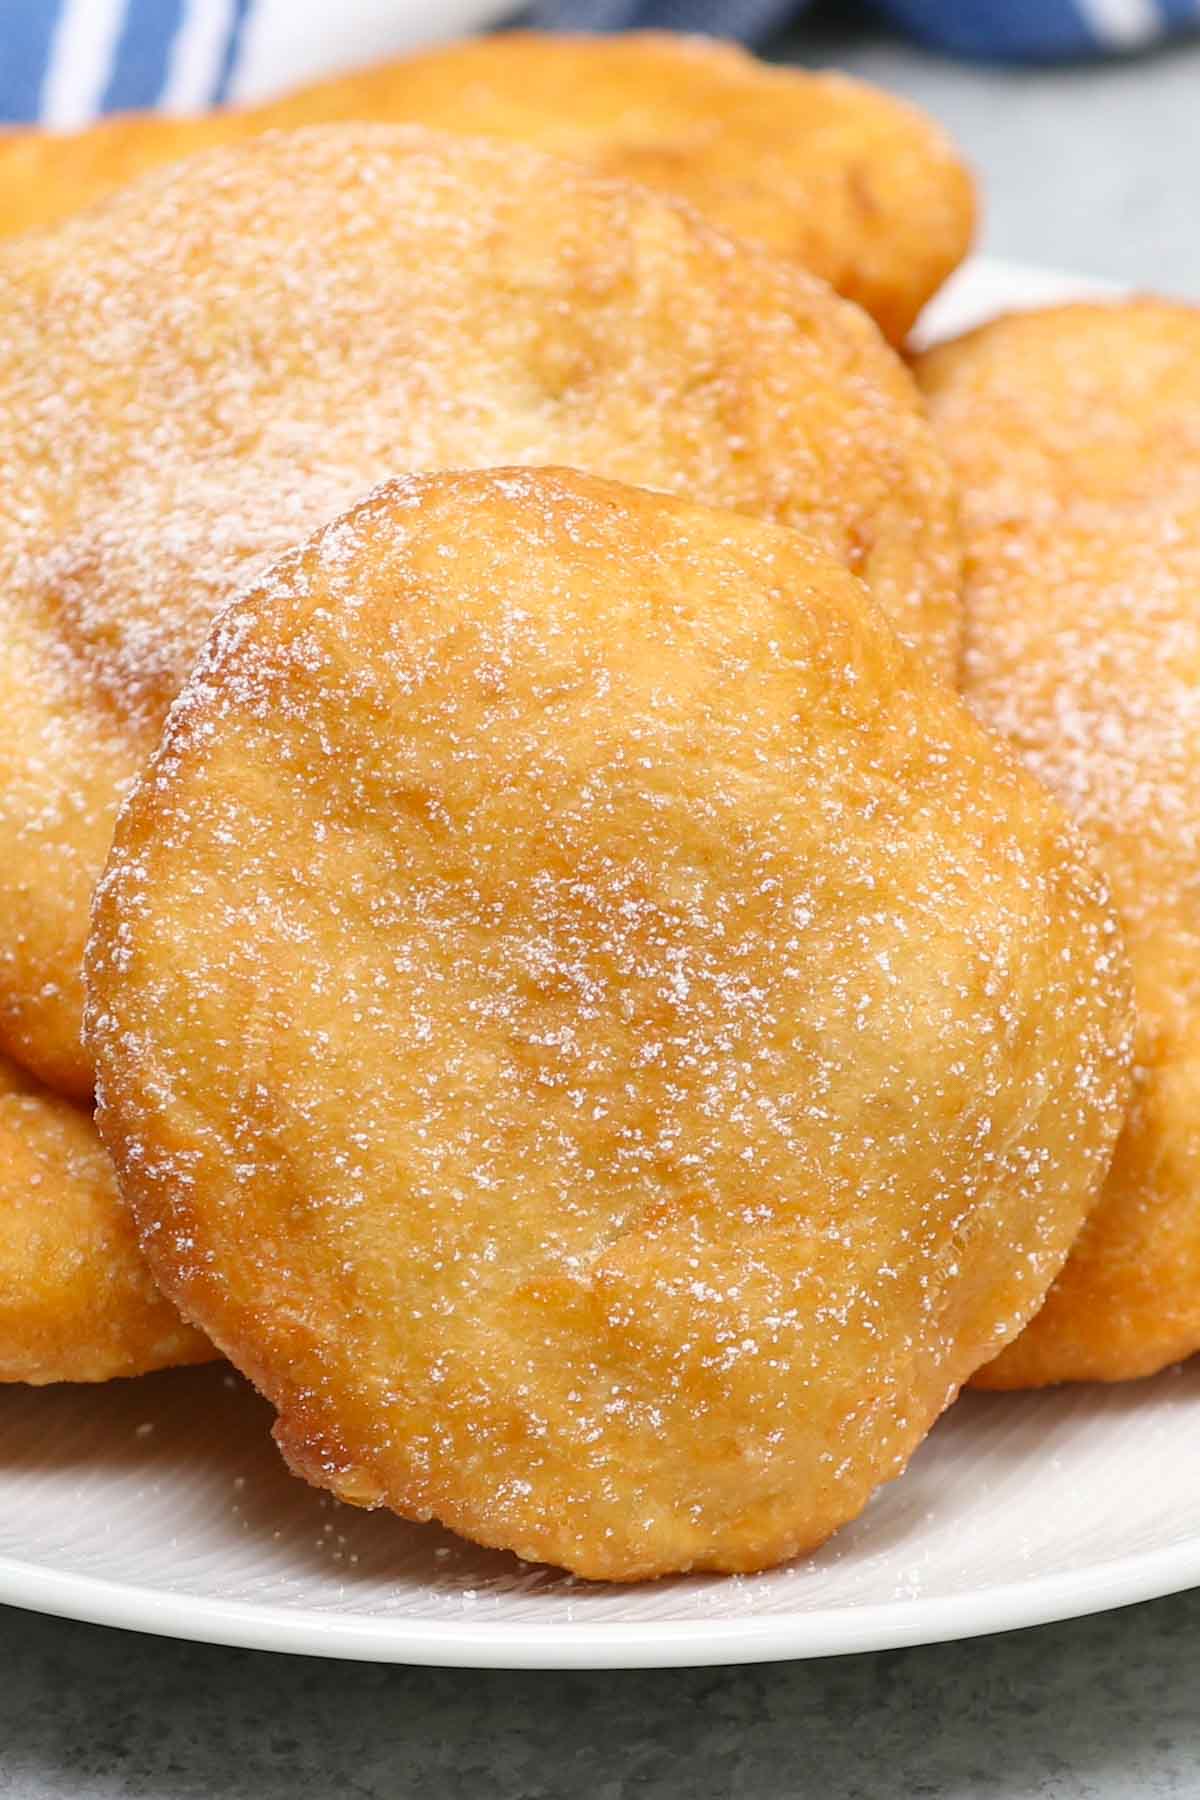 If you want to recreate the experience of a county fair or amusement park at home, there’s no easier way than with Fried Dough. This simple treat is a popular street food that is often enjoyed at outdoor activities.